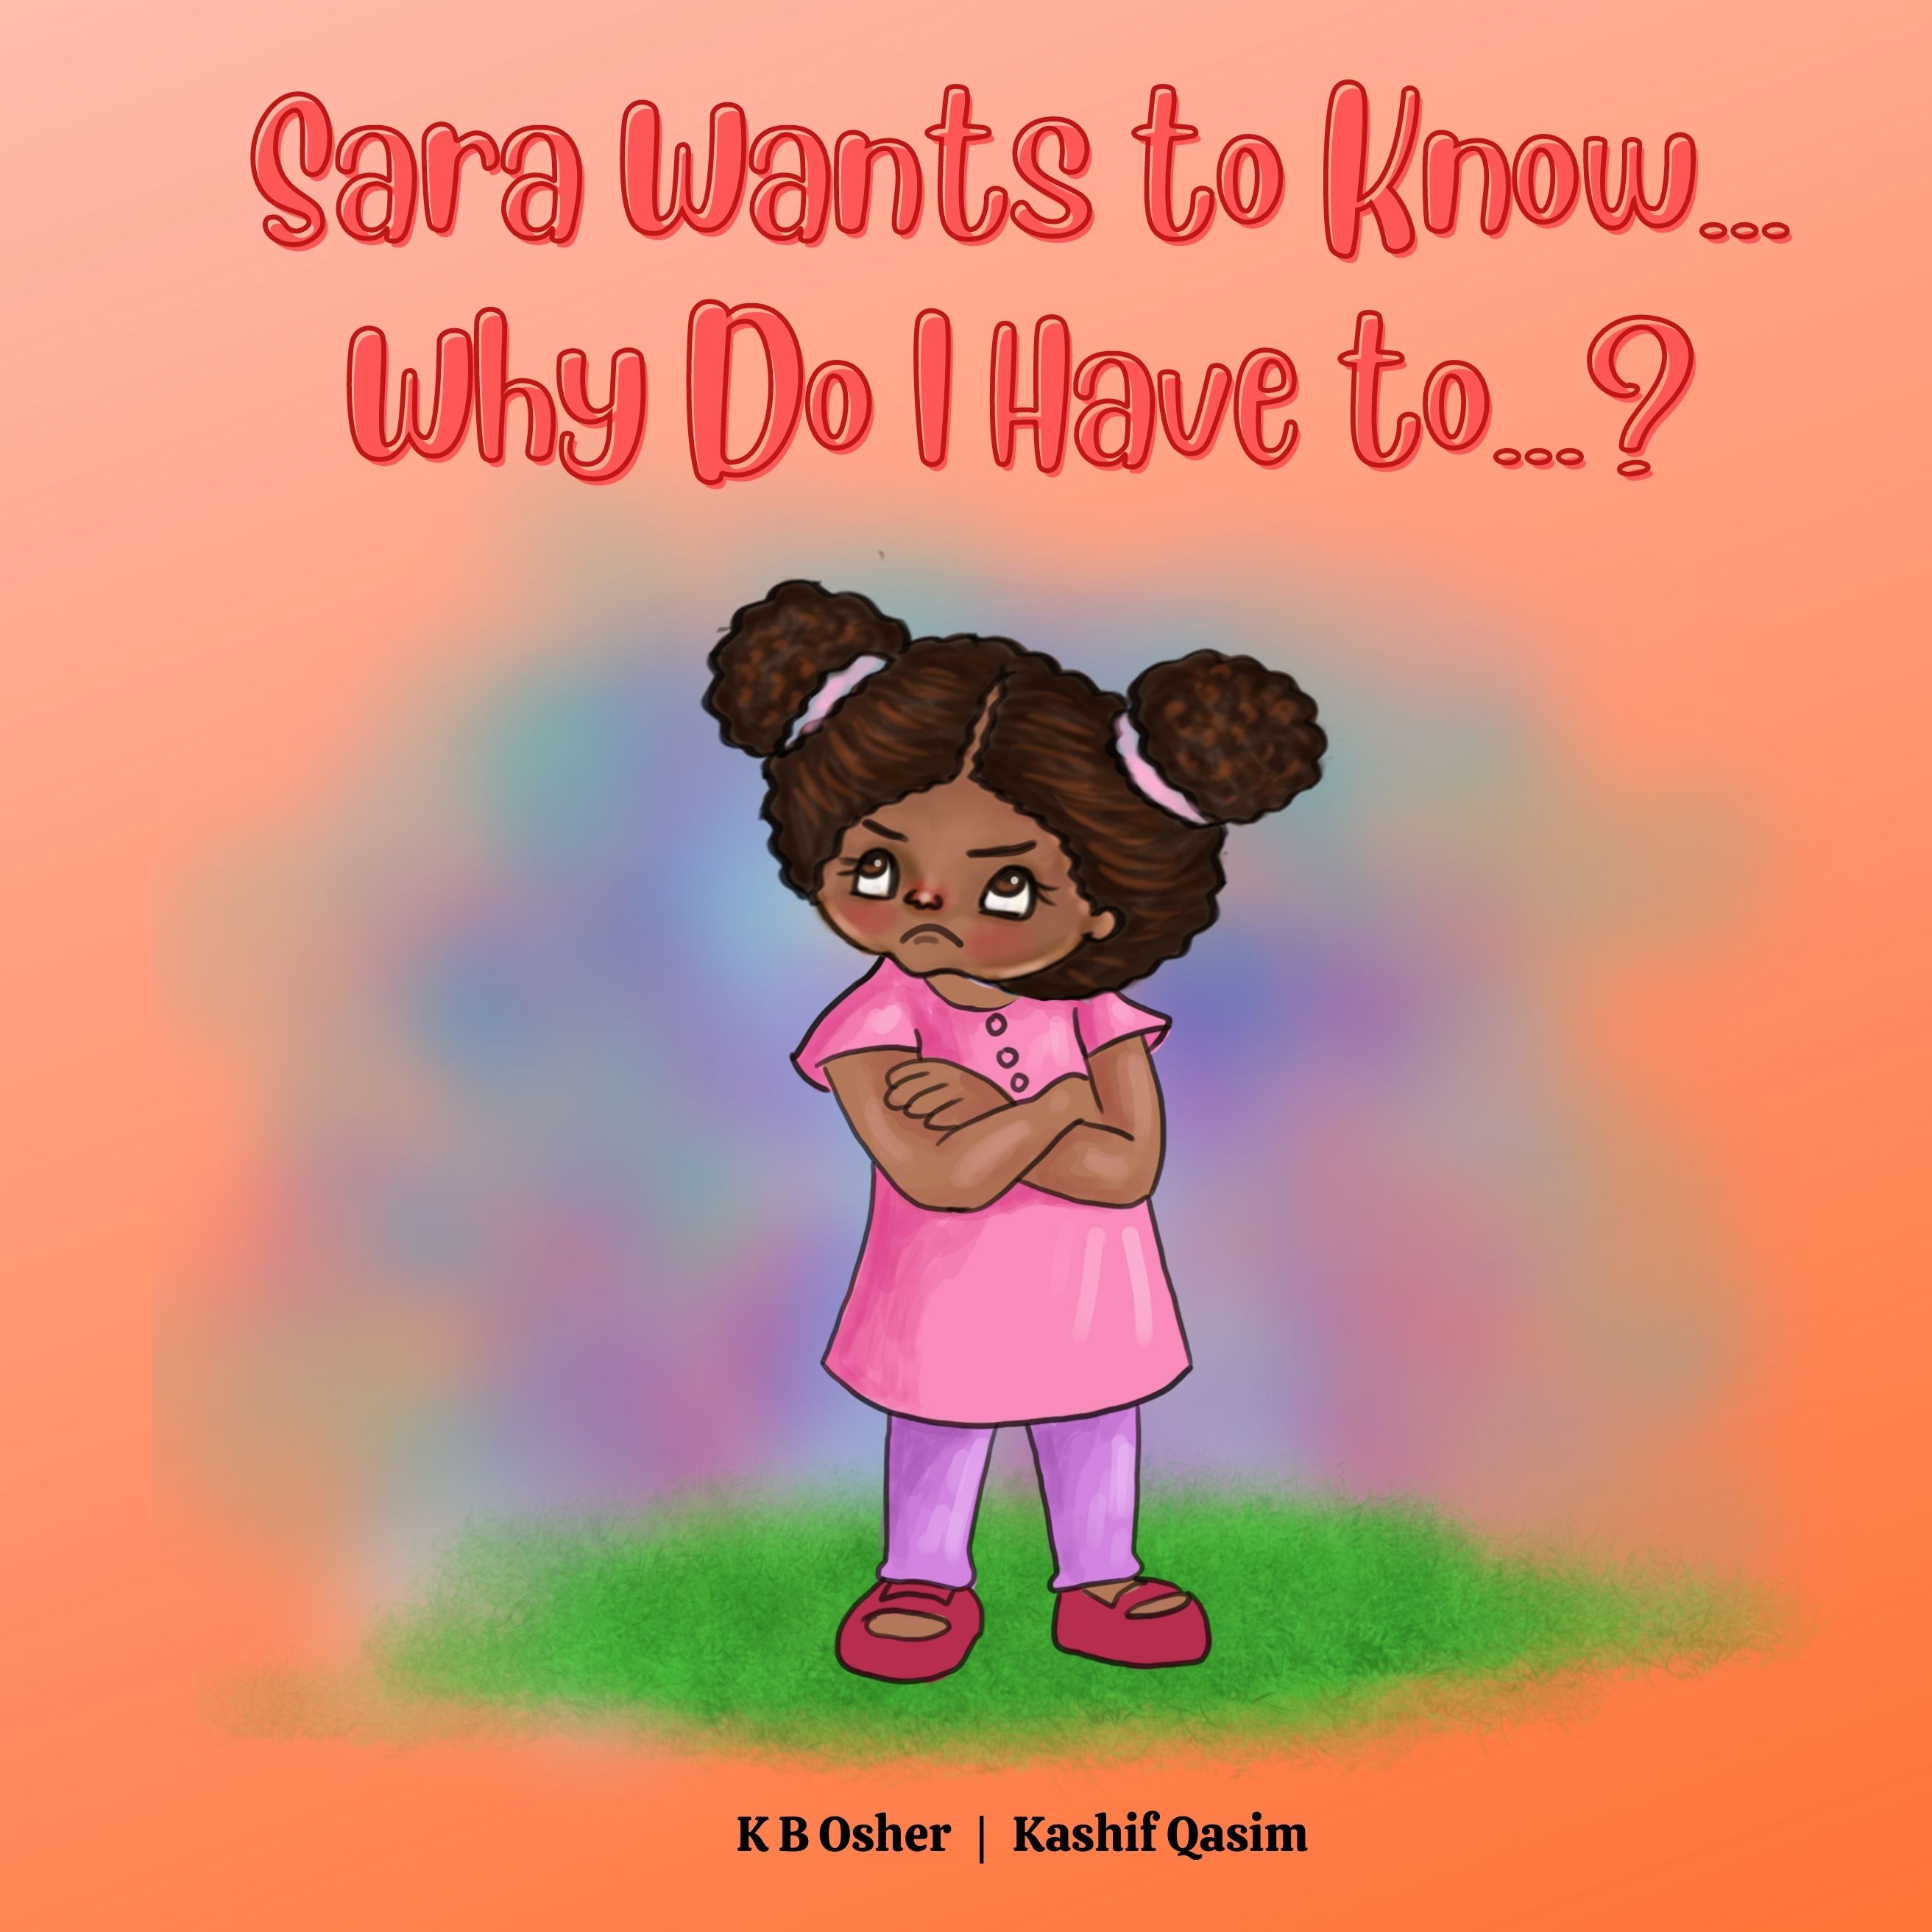 Sara Wants to Know... Why Do I Have to...?